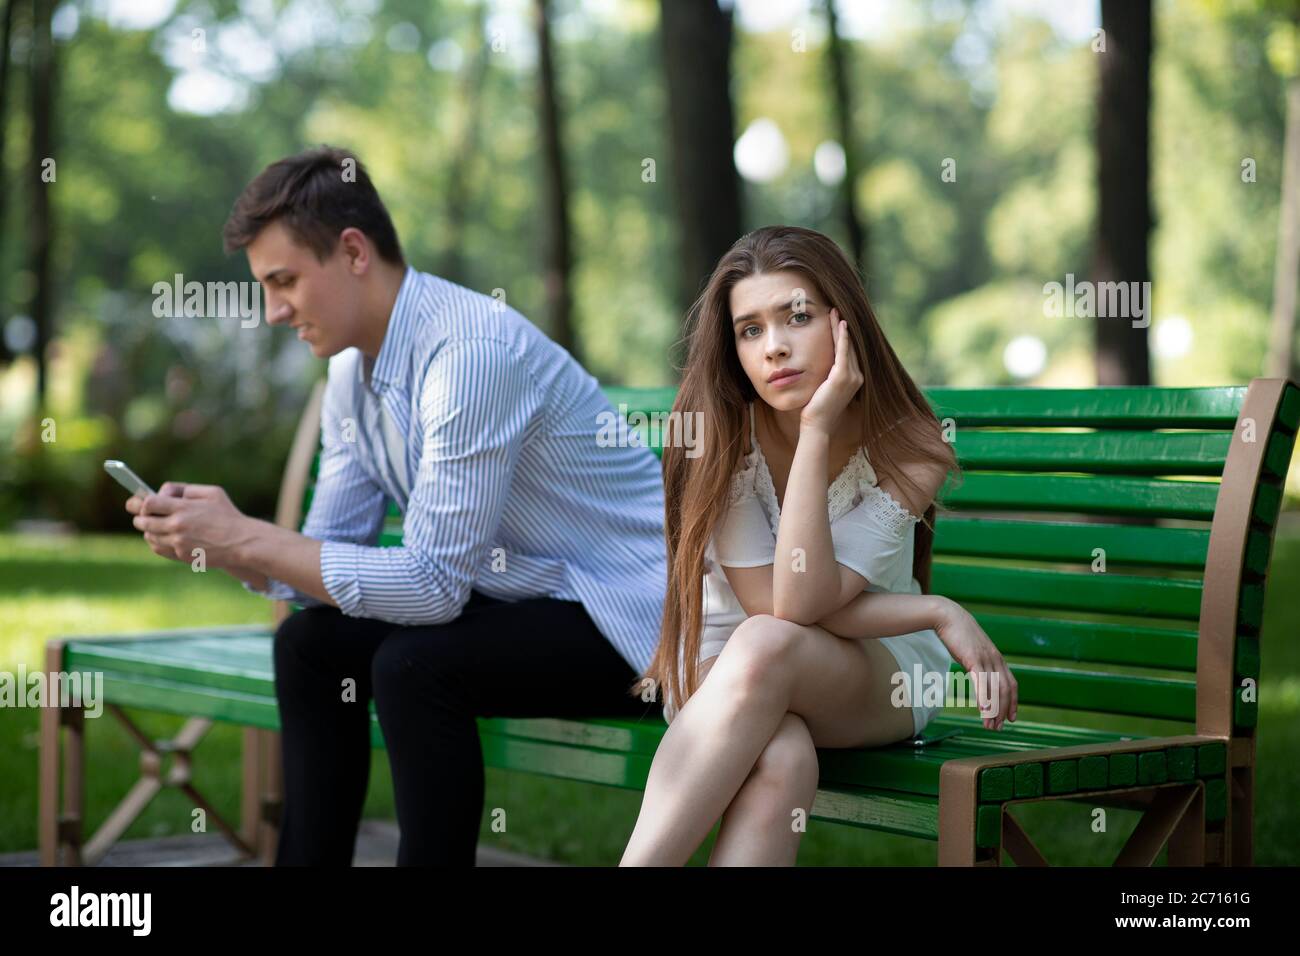 Bored young woman on dull date, suffering from her boyfriend's neglect or smartphone addiction at park Stock Photo